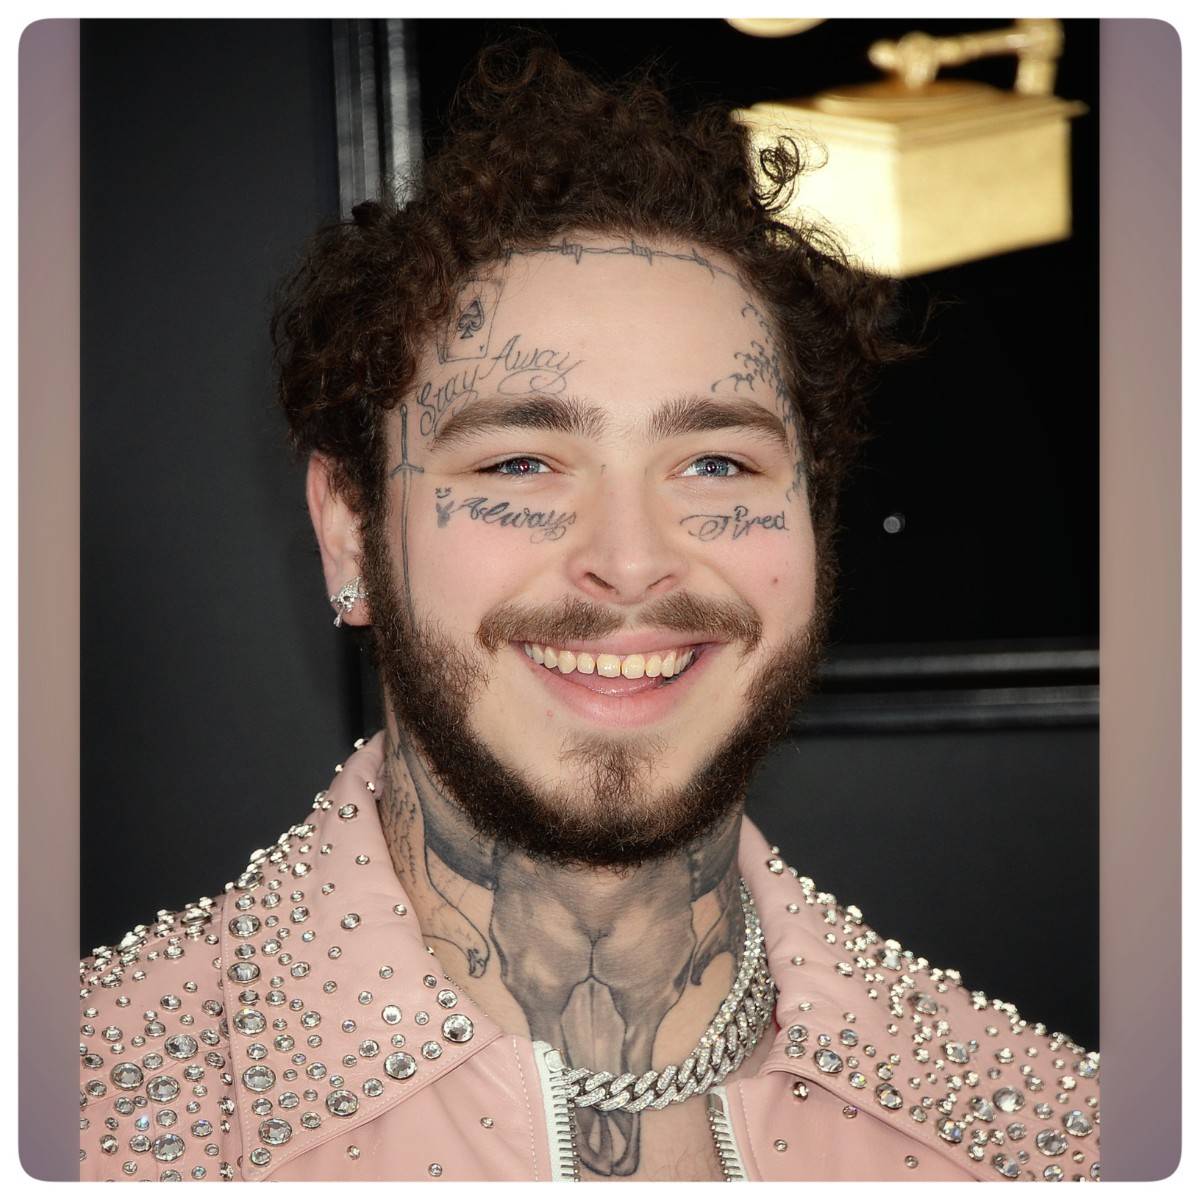 Post Malone had to take a tumble on stage but become a star after ...